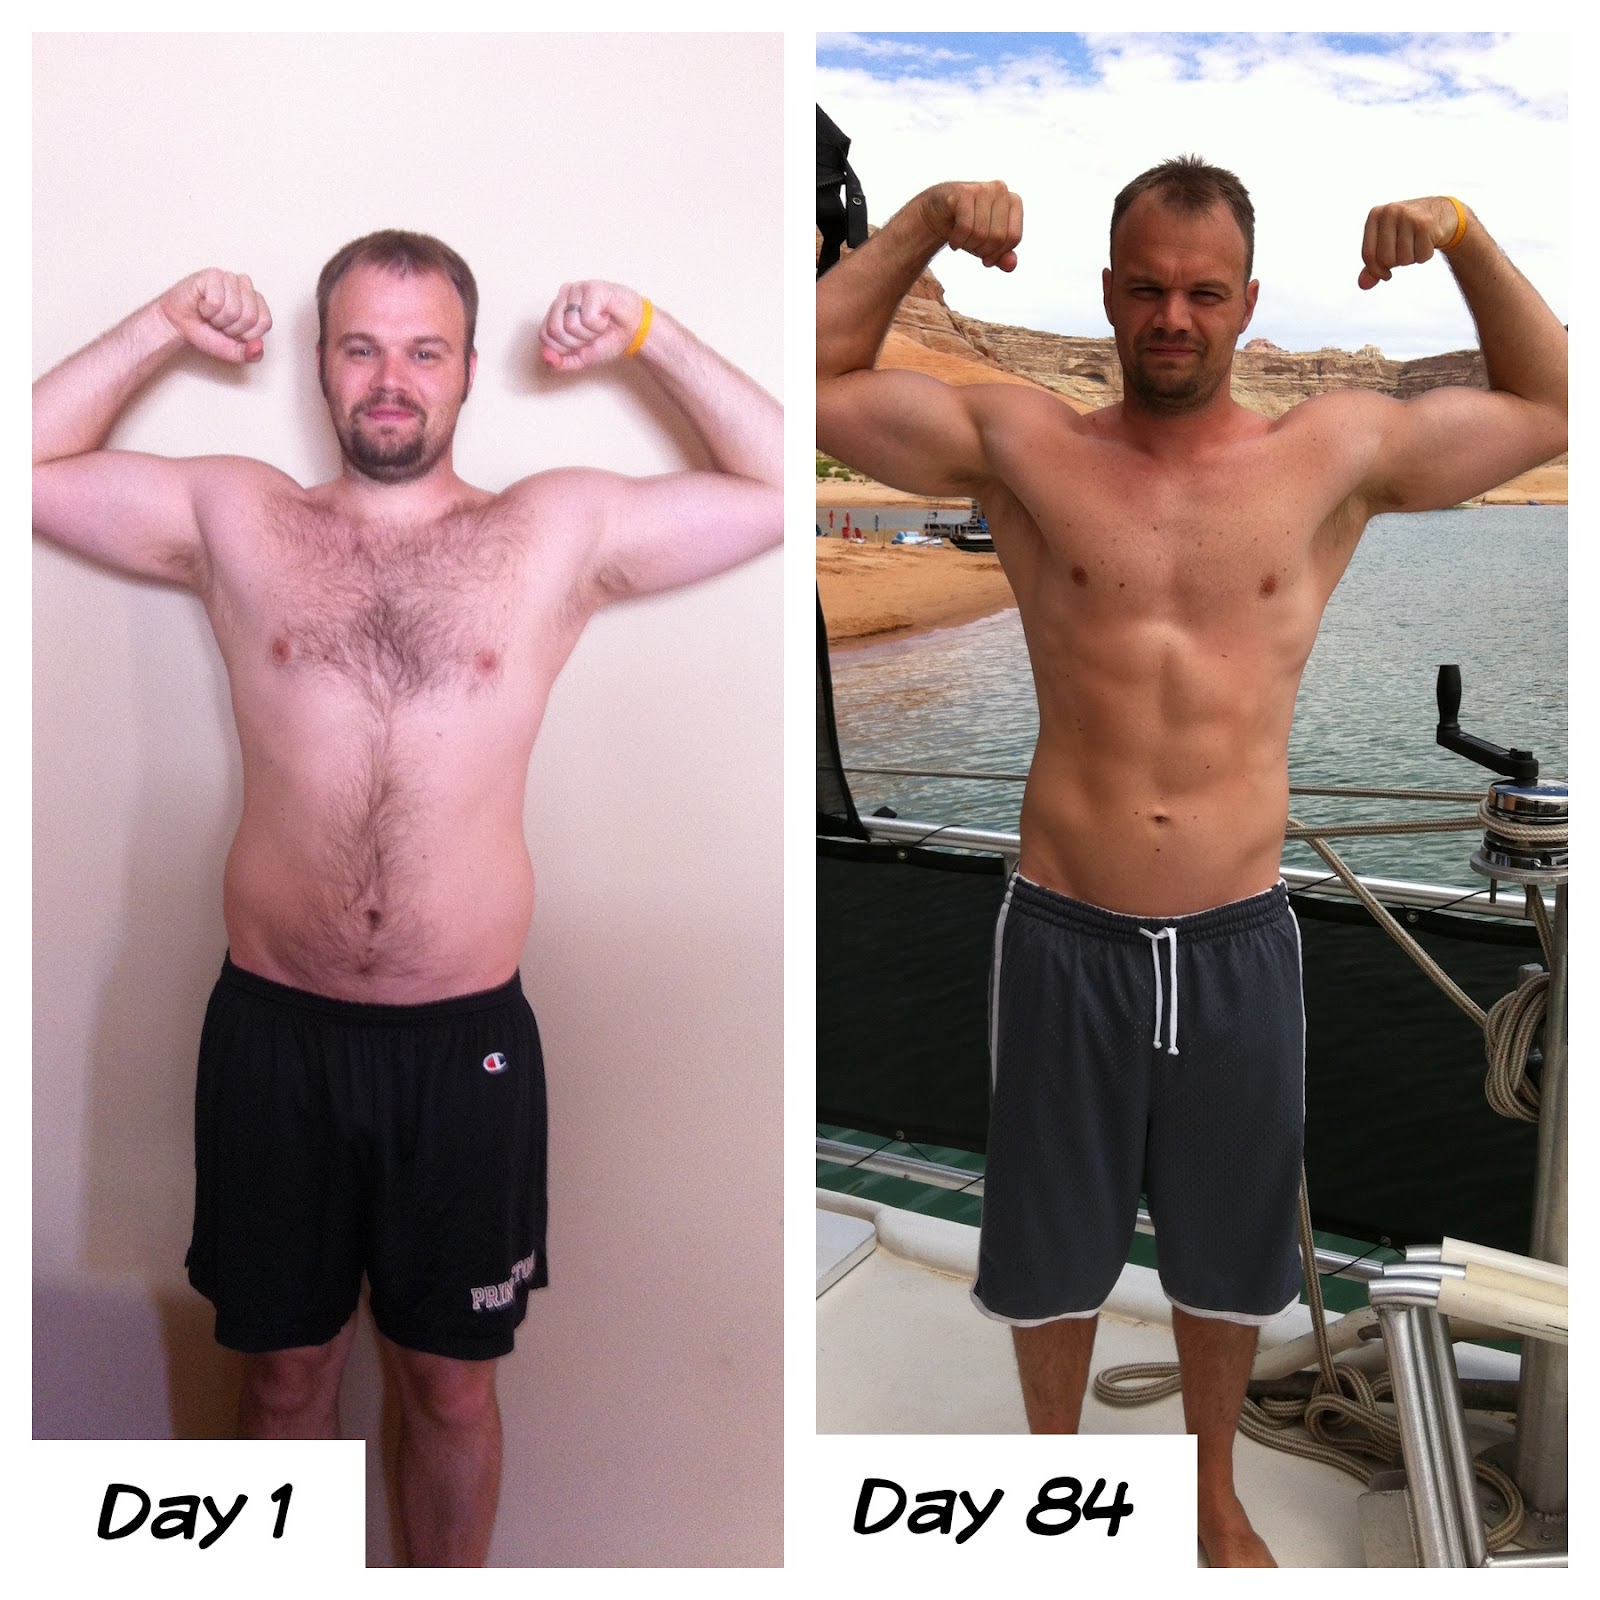 30 Minute P90X Workout Results Without Diet for Beginner